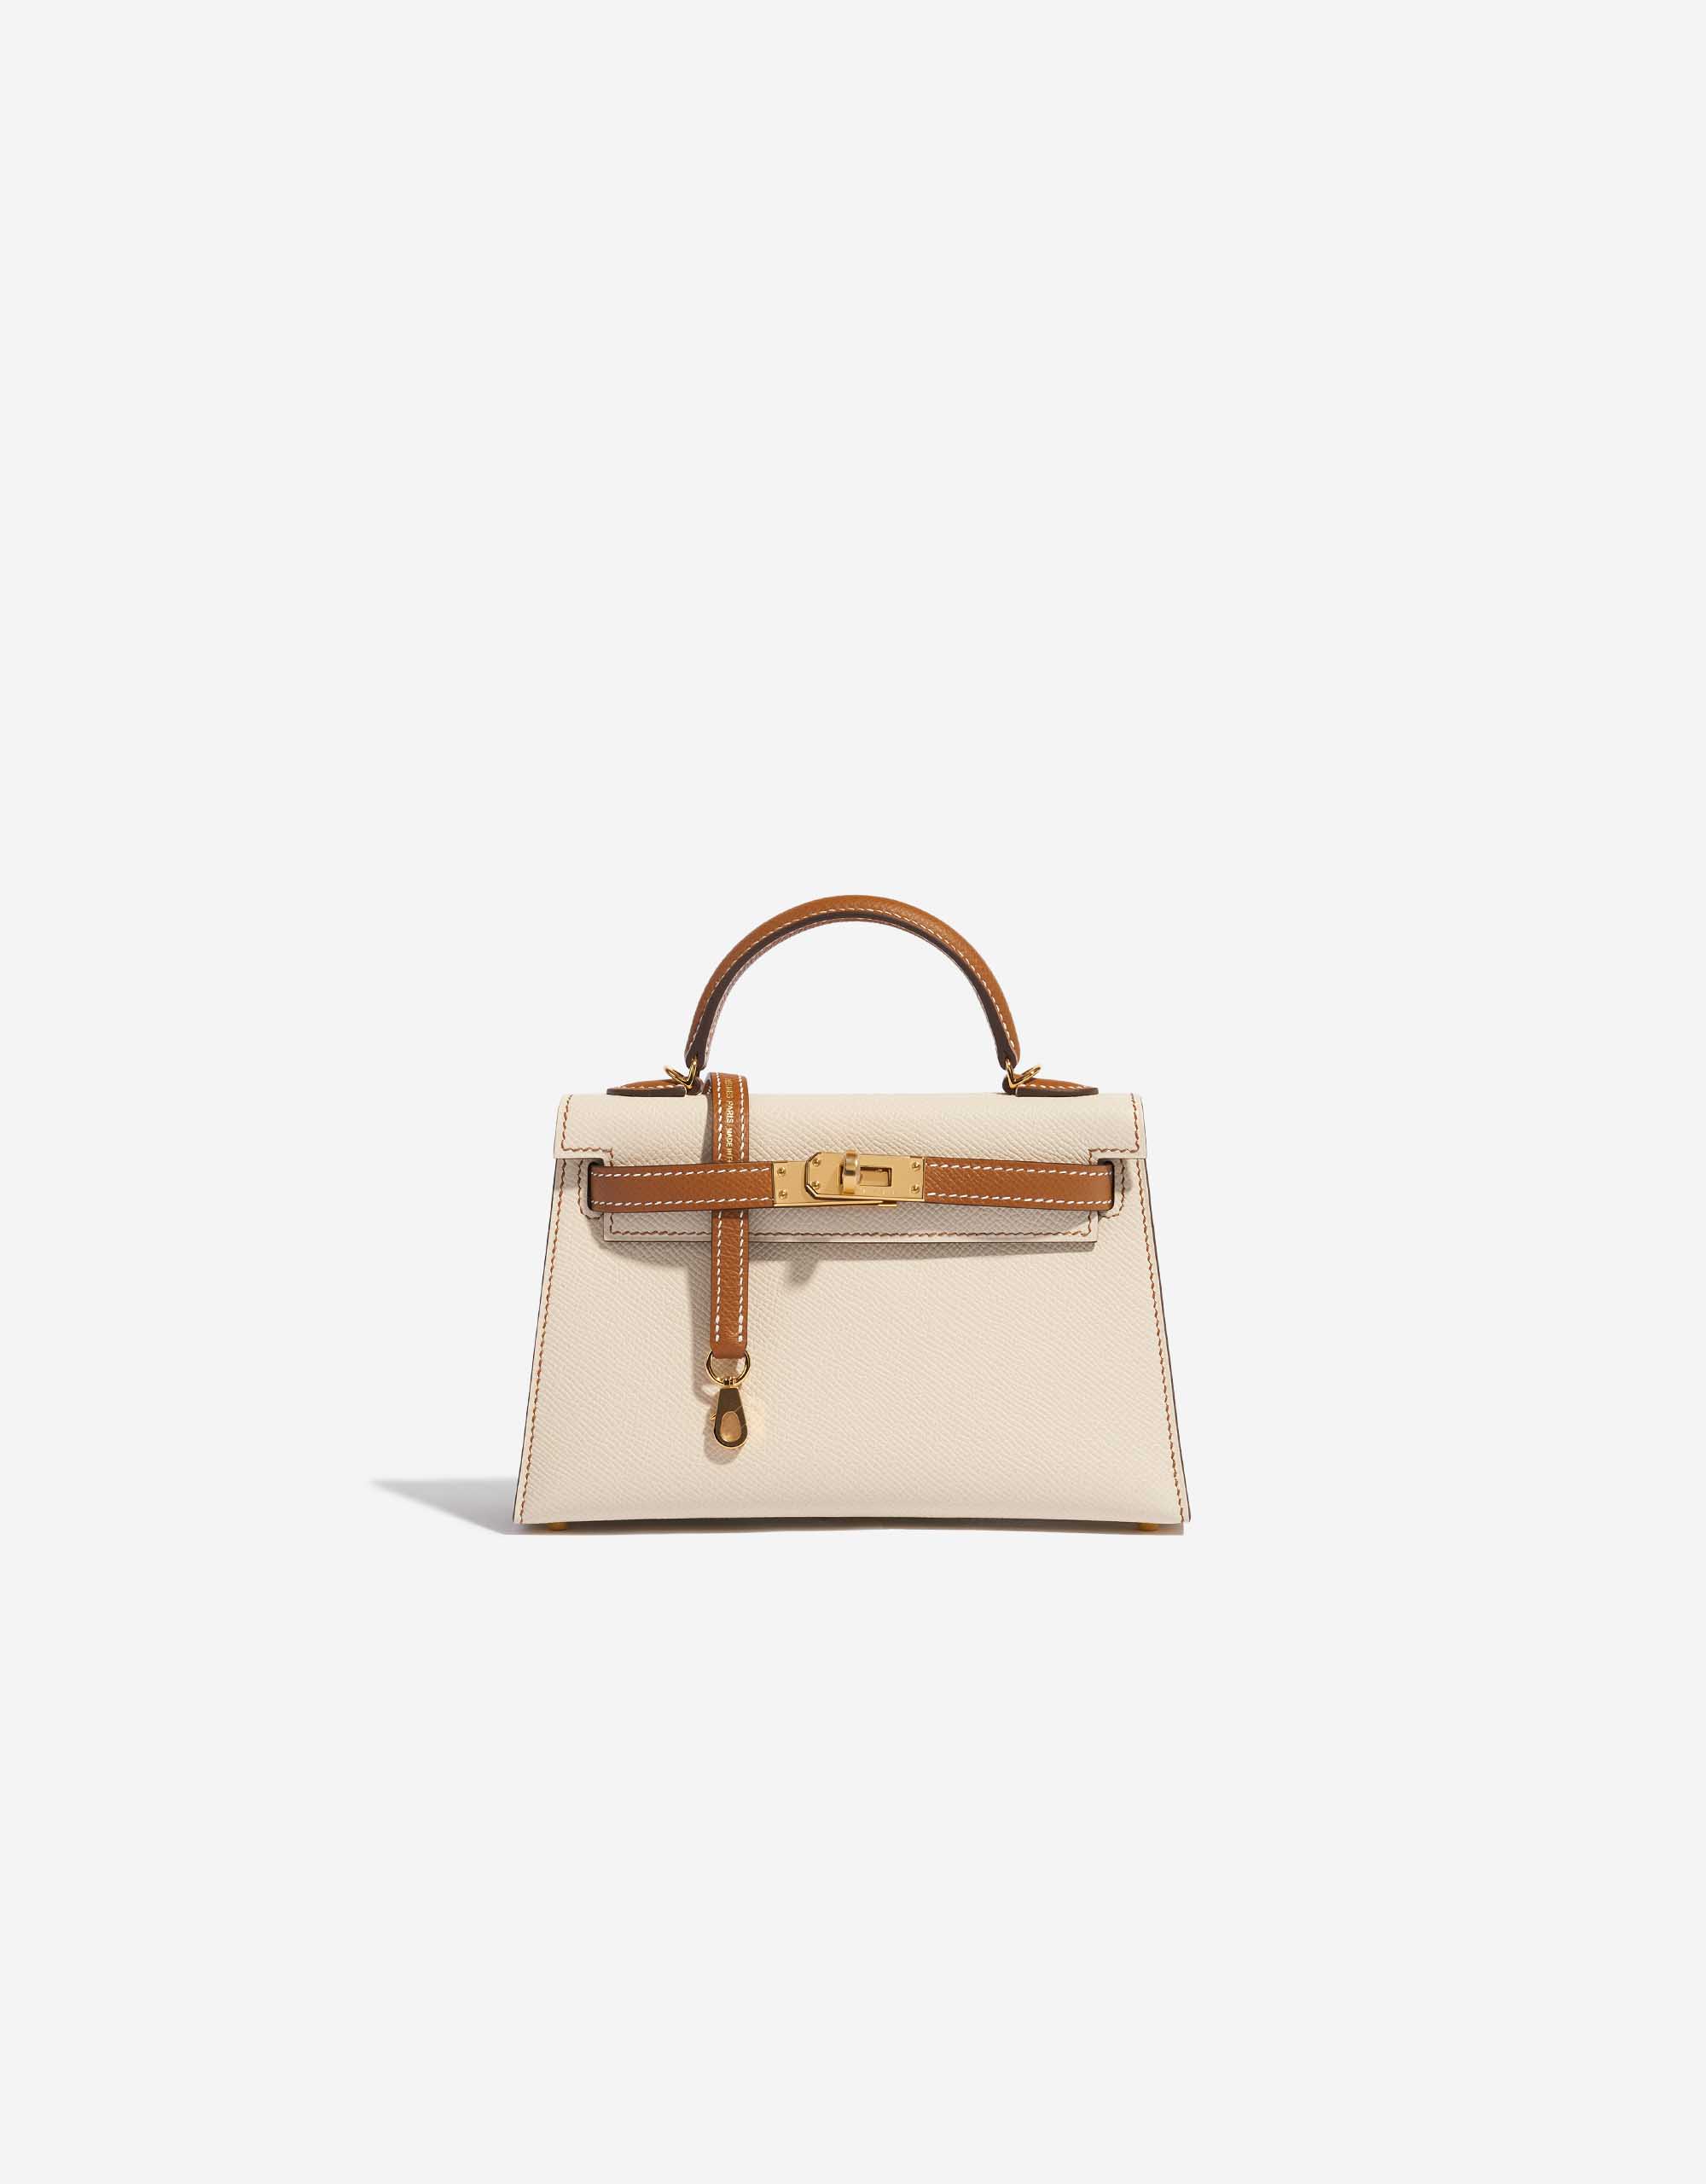 A CUSTOM CRAIE & TRENCH EPSOM LEATHER MINI KELLY 20 II WITH GOLD HARDWARE,  HERMÈS, 2021